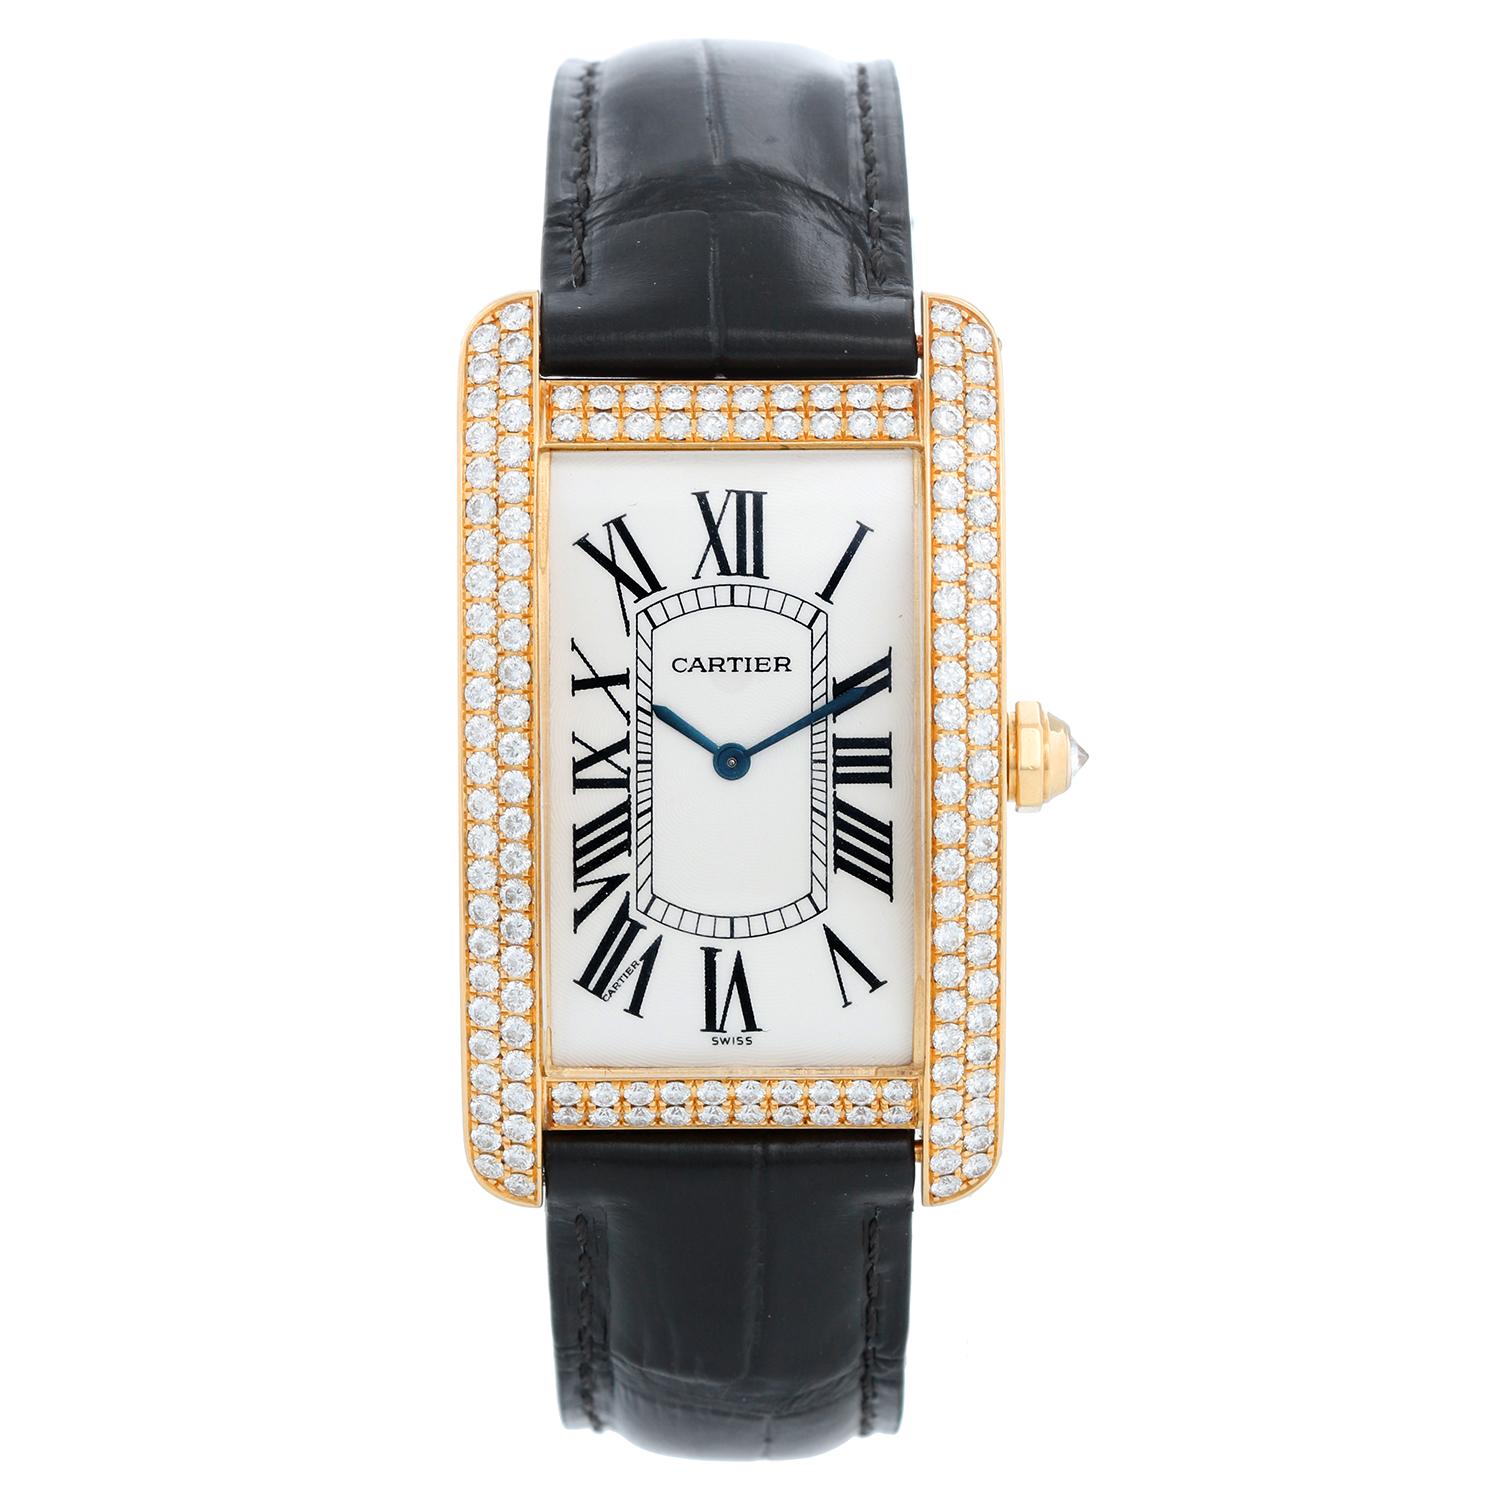 Cartier Tank Americaine Large 18k Yellow Gold & Diamond Watch Ref 1735 - Manual. 18k yellow gold case with 2-row factory diamond bezel (26mm x 45mm). Silver guilloche with black Roman numerals. Black  Cartier leather strap with Cartier tang buckle.